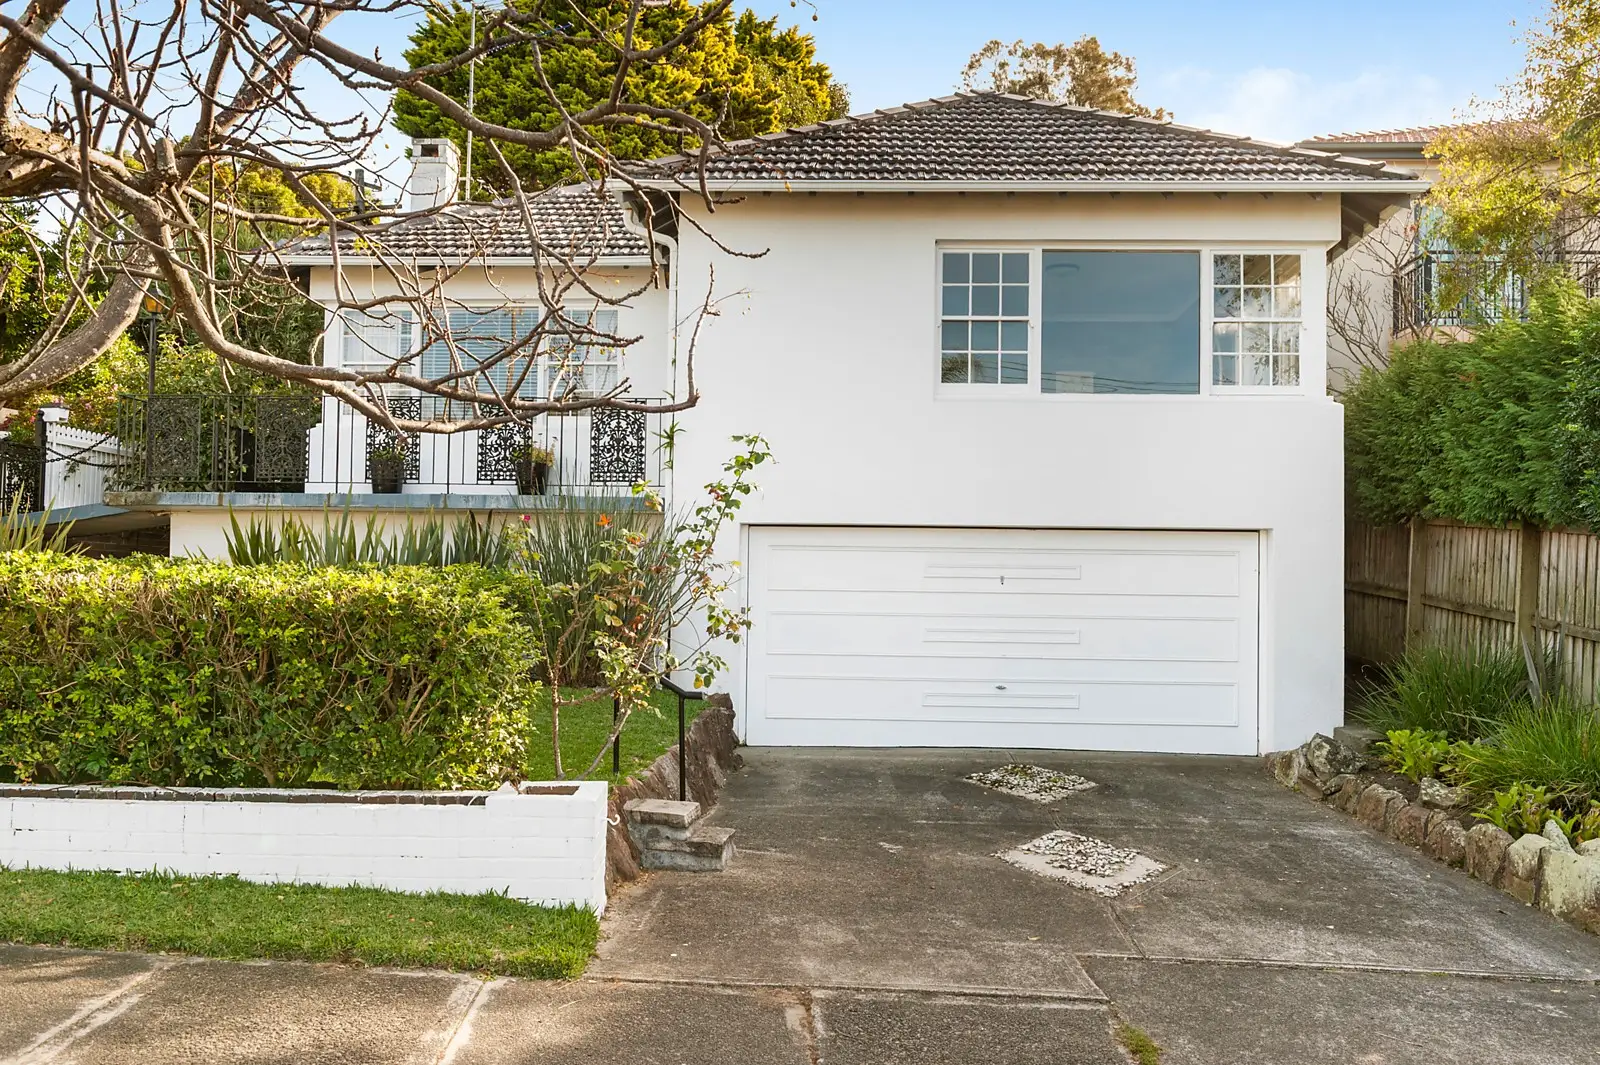 Photo #1: 8 Girilang Avenue, Vaucluse - Sold by Sydney Sotheby's International Realty